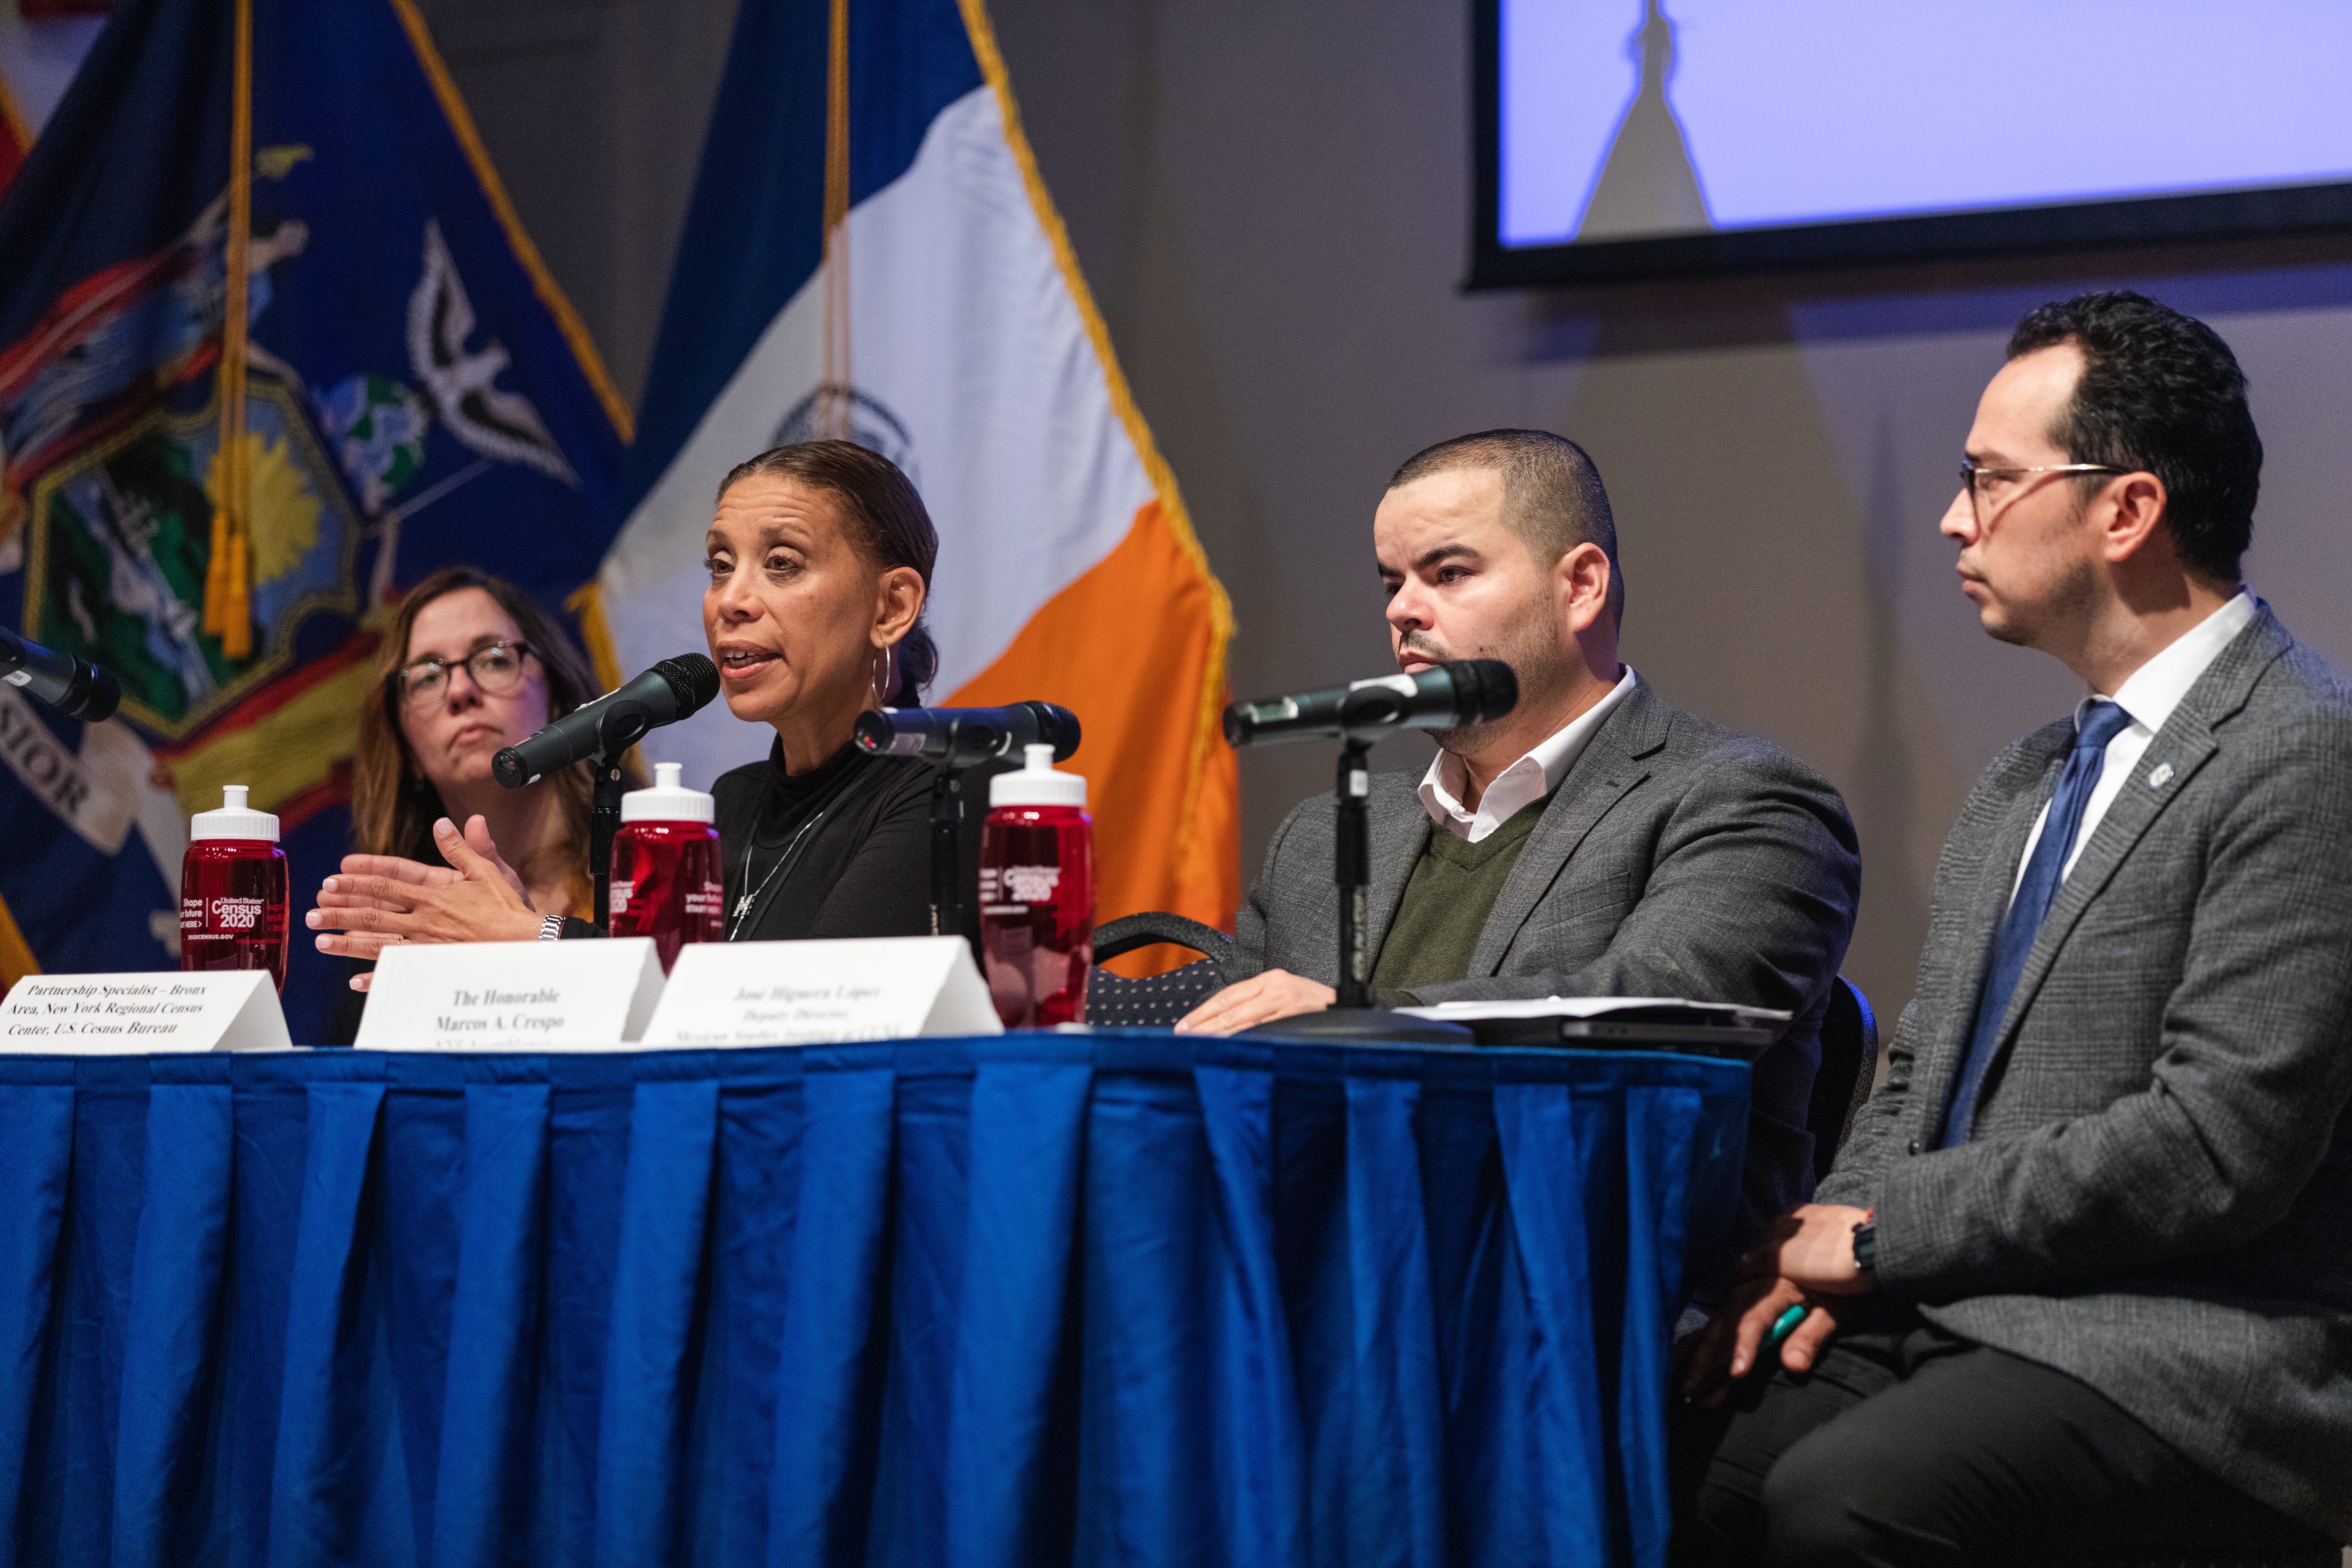 Photo of participants in the "Make the Bronx Count" panel.
